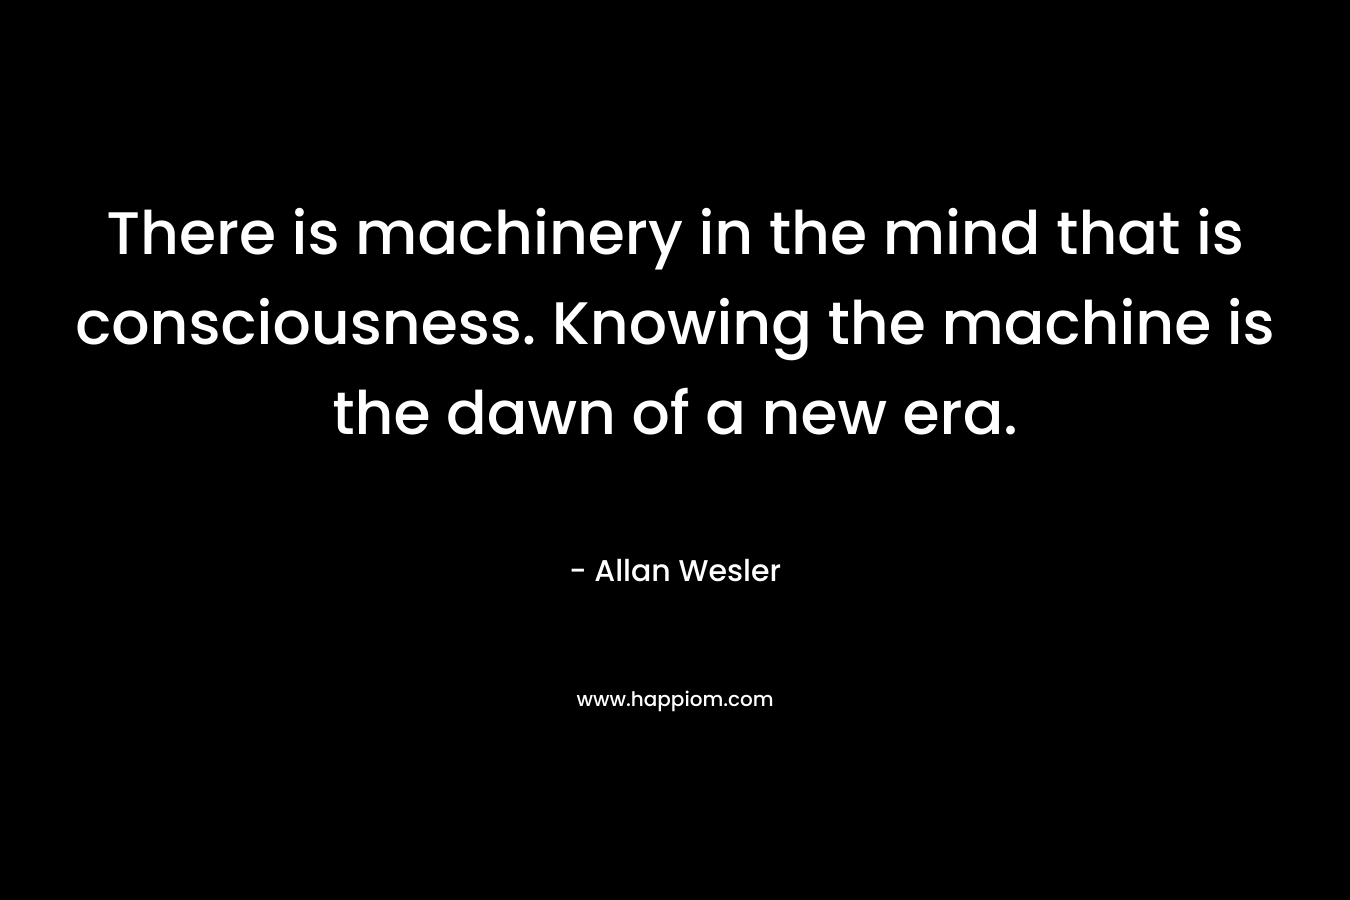 There is machinery in the mind that is consciousness. Knowing the machine is the dawn of a new era. – Allan Wesler